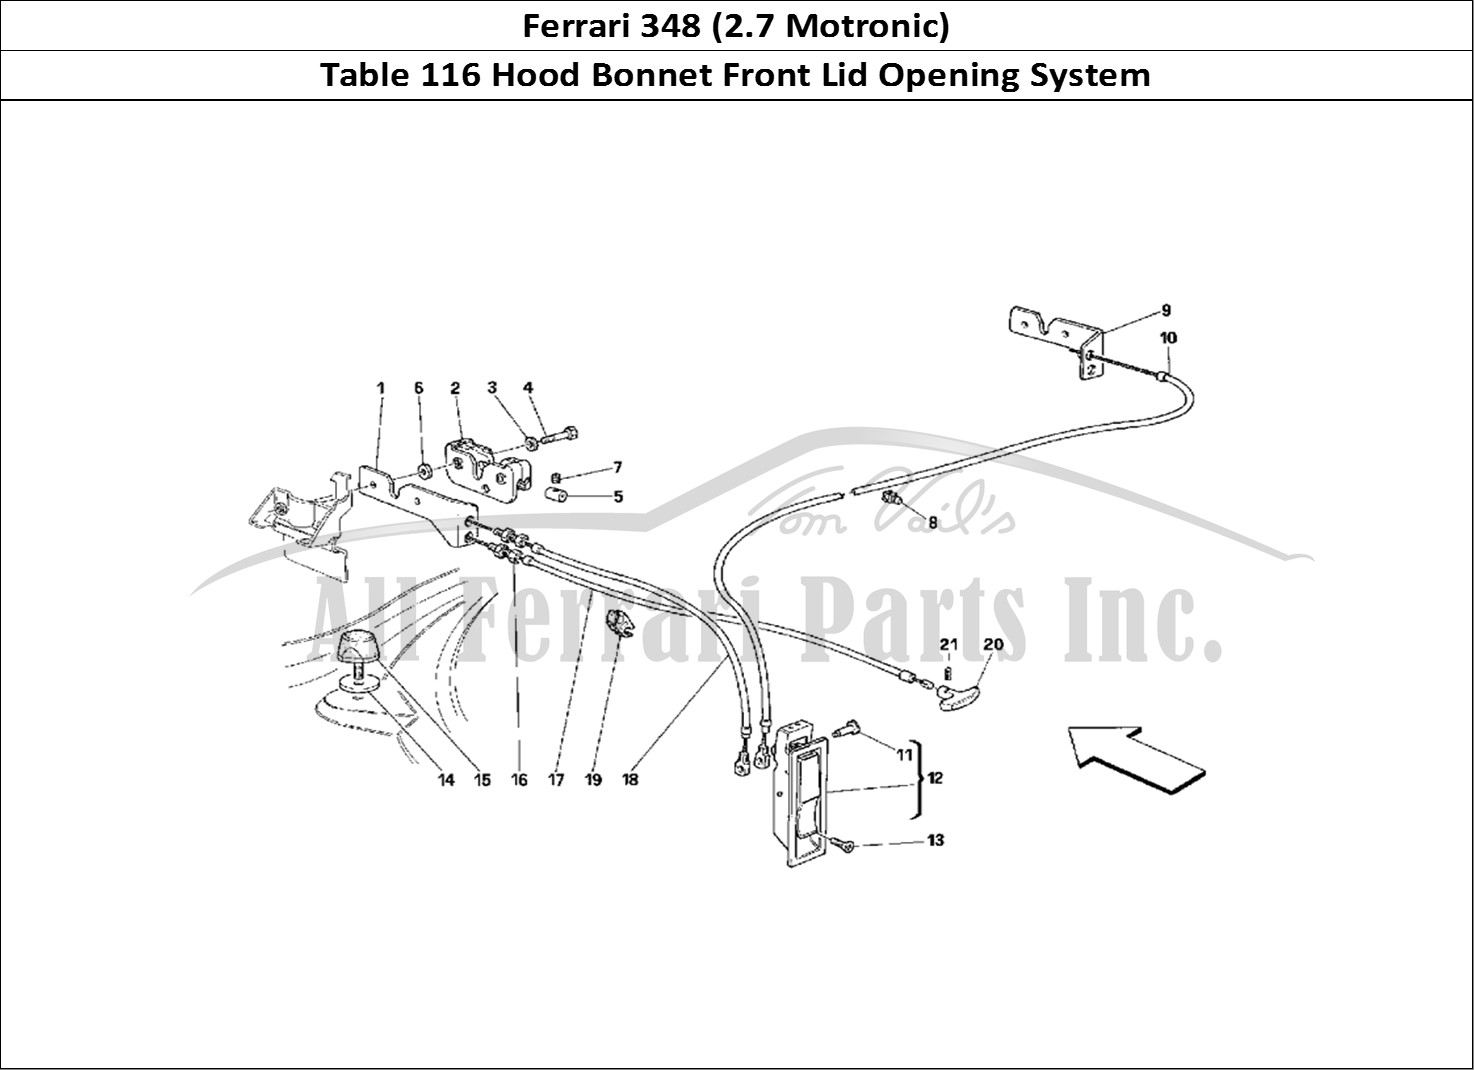 Ferrari Parts Ferrari 348 (2.7 Motronic) Page 116 Opening Device for Front